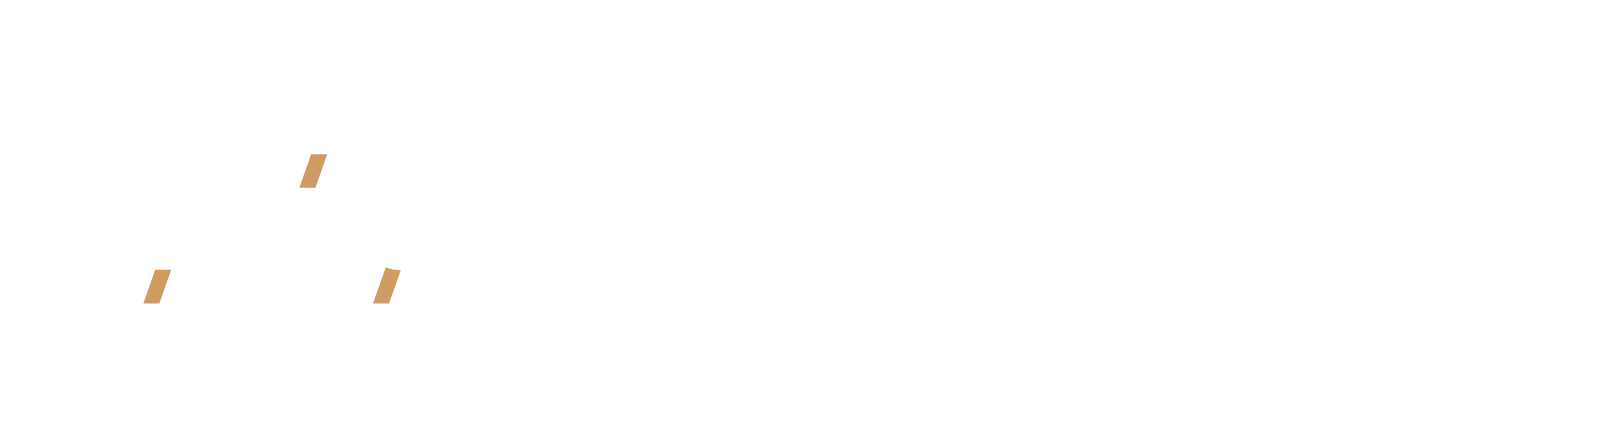 Spatial Topology Technology